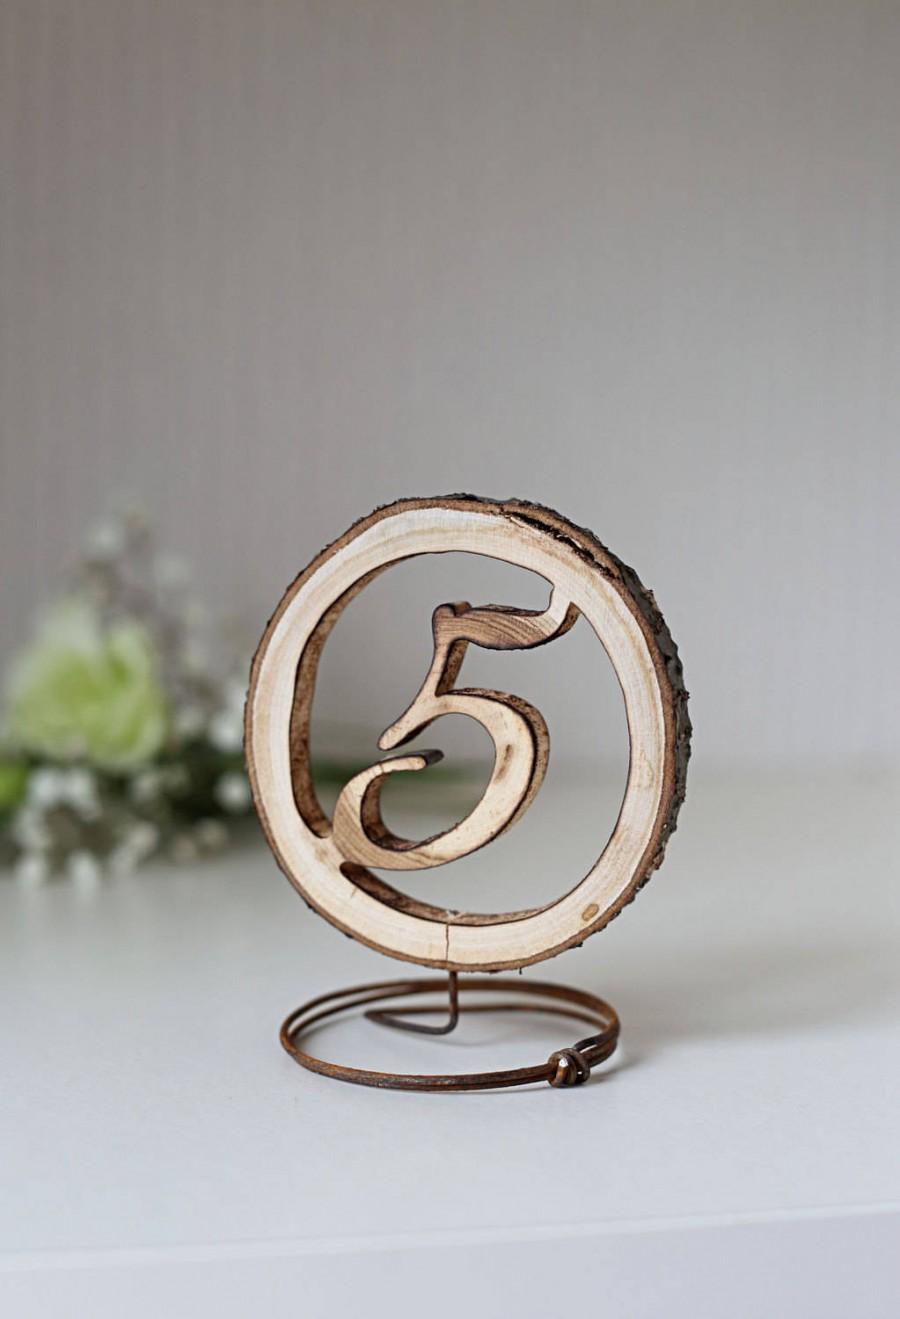 Wedding - Table numbers for wedding, rustic table numbers, free standing table numbers, table numbers, wedding table numbers, event table numbers